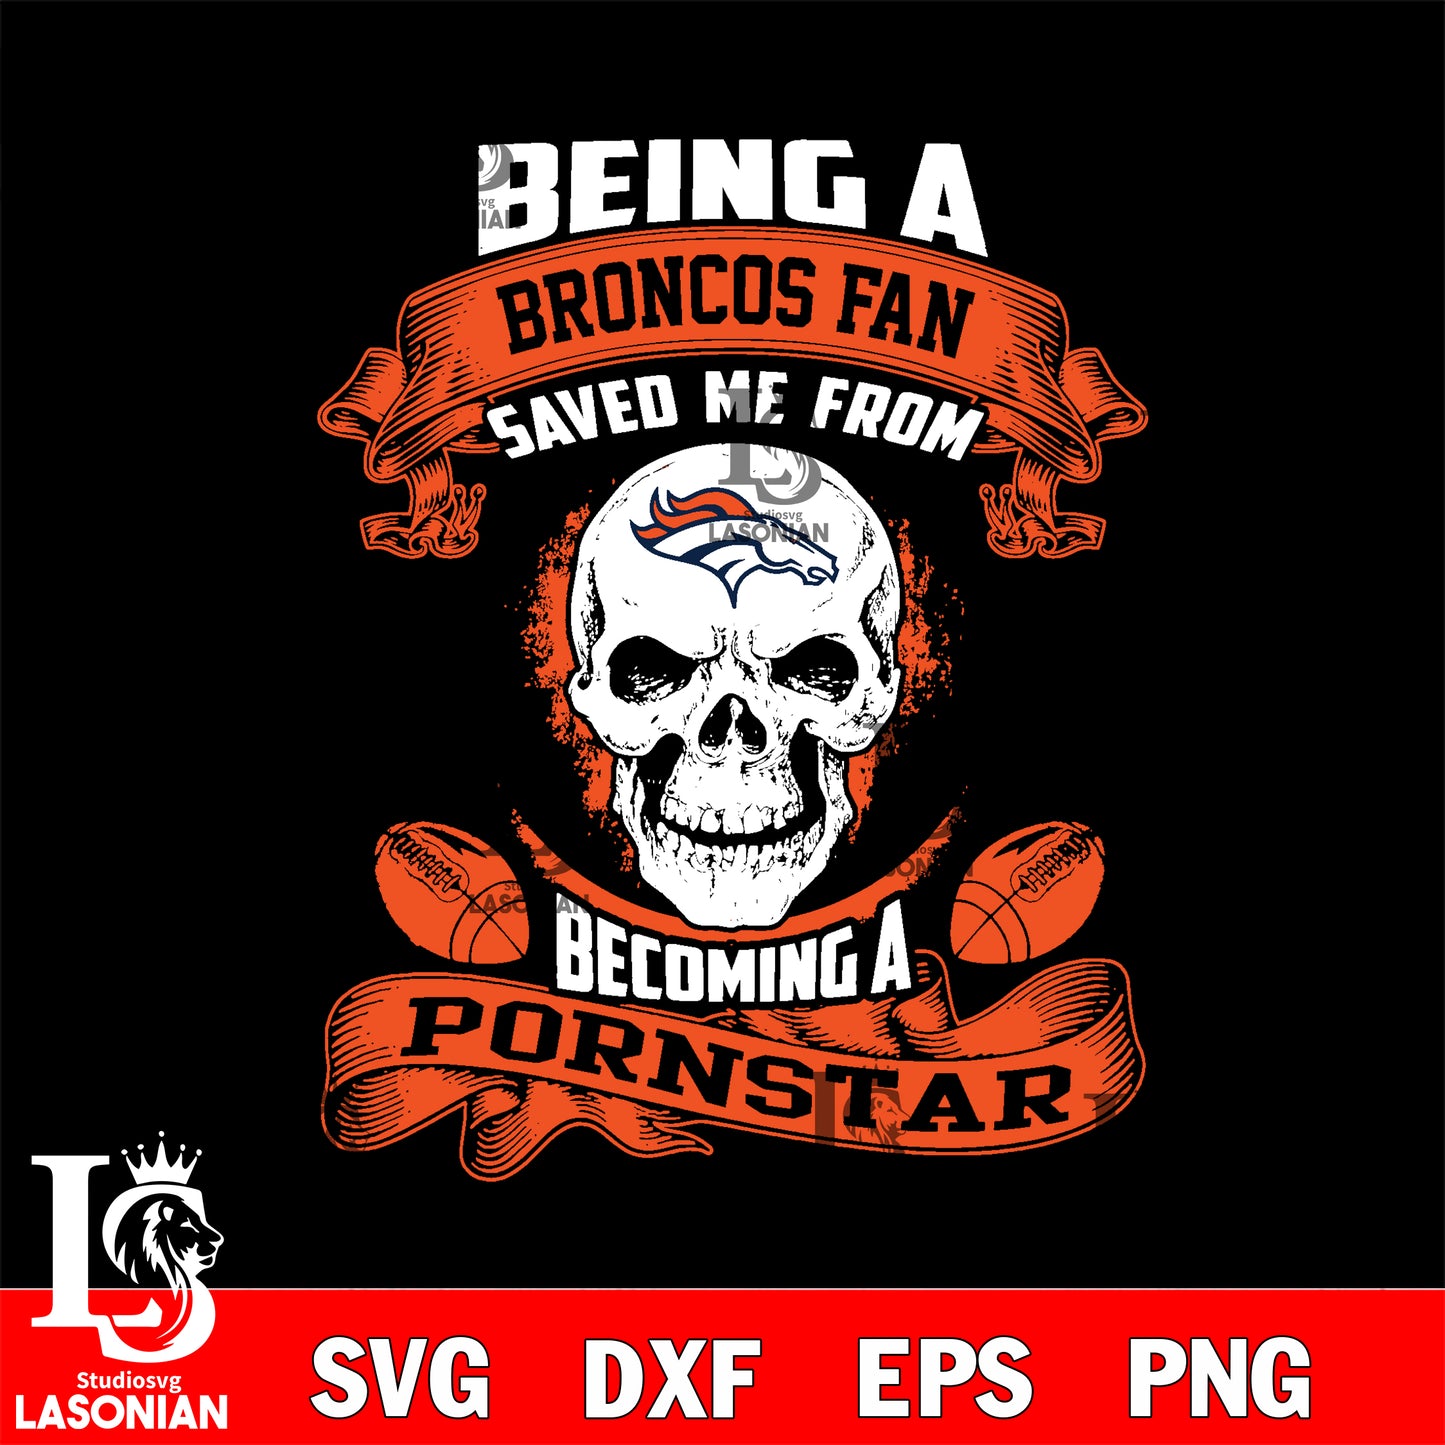 Being a Denver Broncos Raiders save me from becoming a pornstar svg ,eps,dxf,png file , digital download